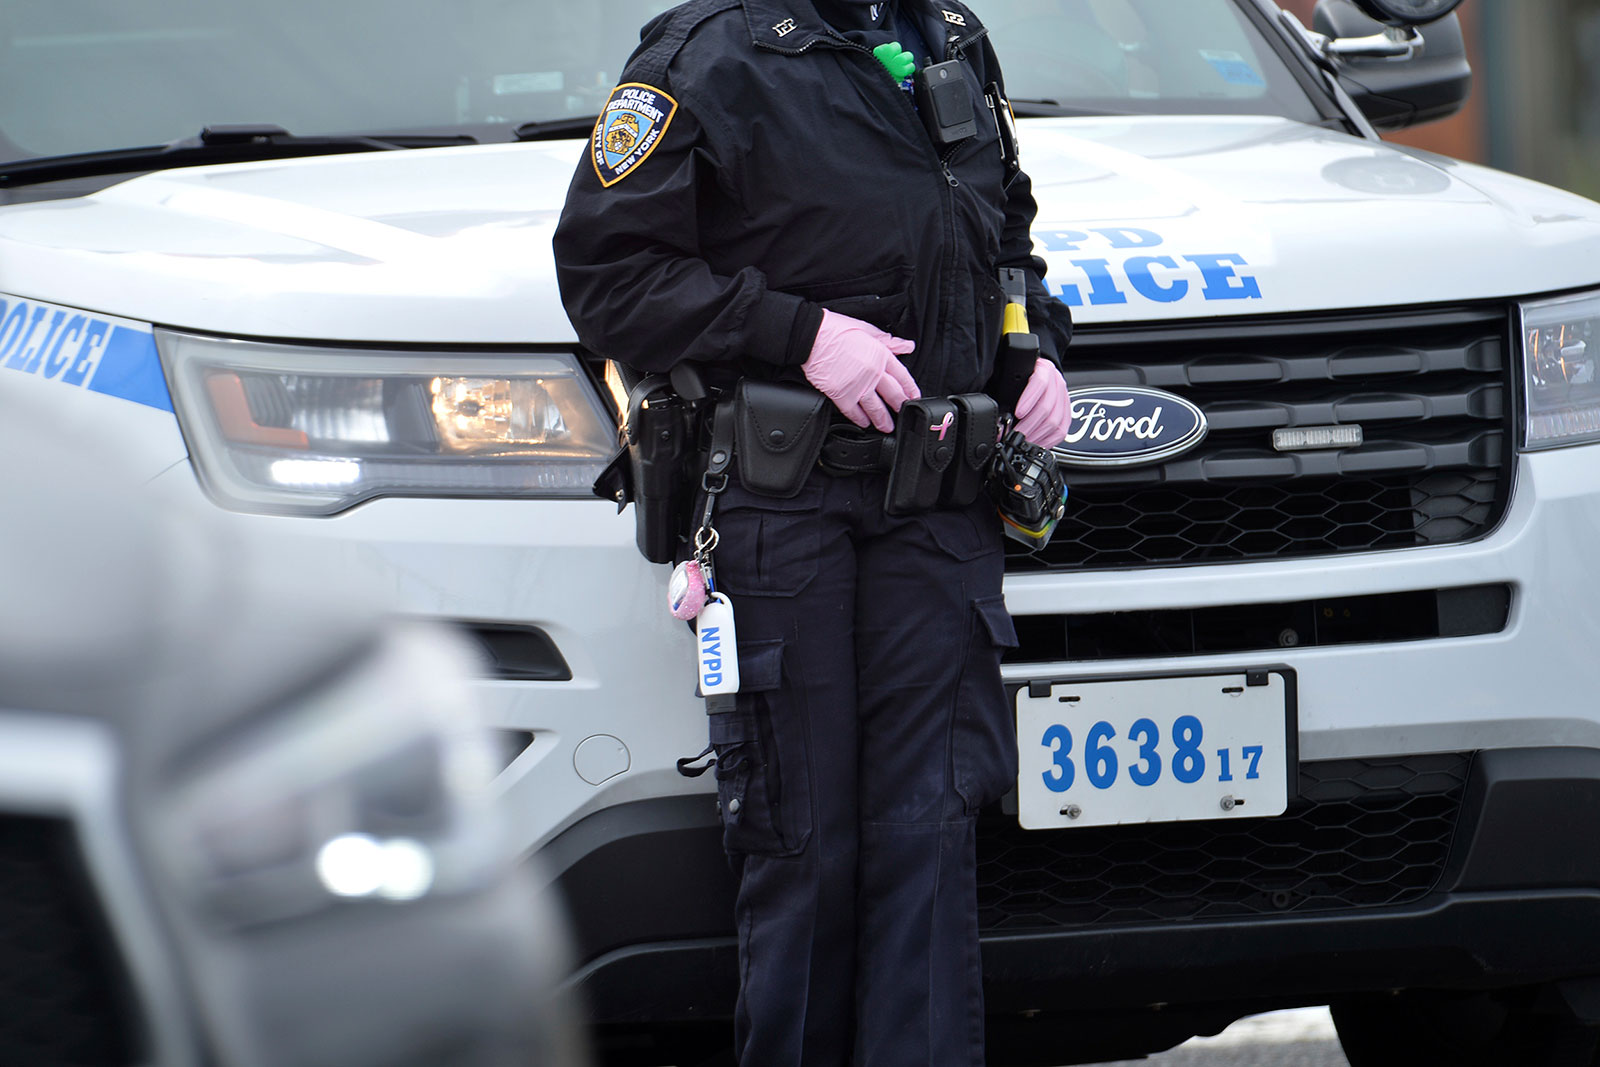 An NYPD officer helps direct traffic at a coronavirus testing center in Staten Island, New York, on March 19.